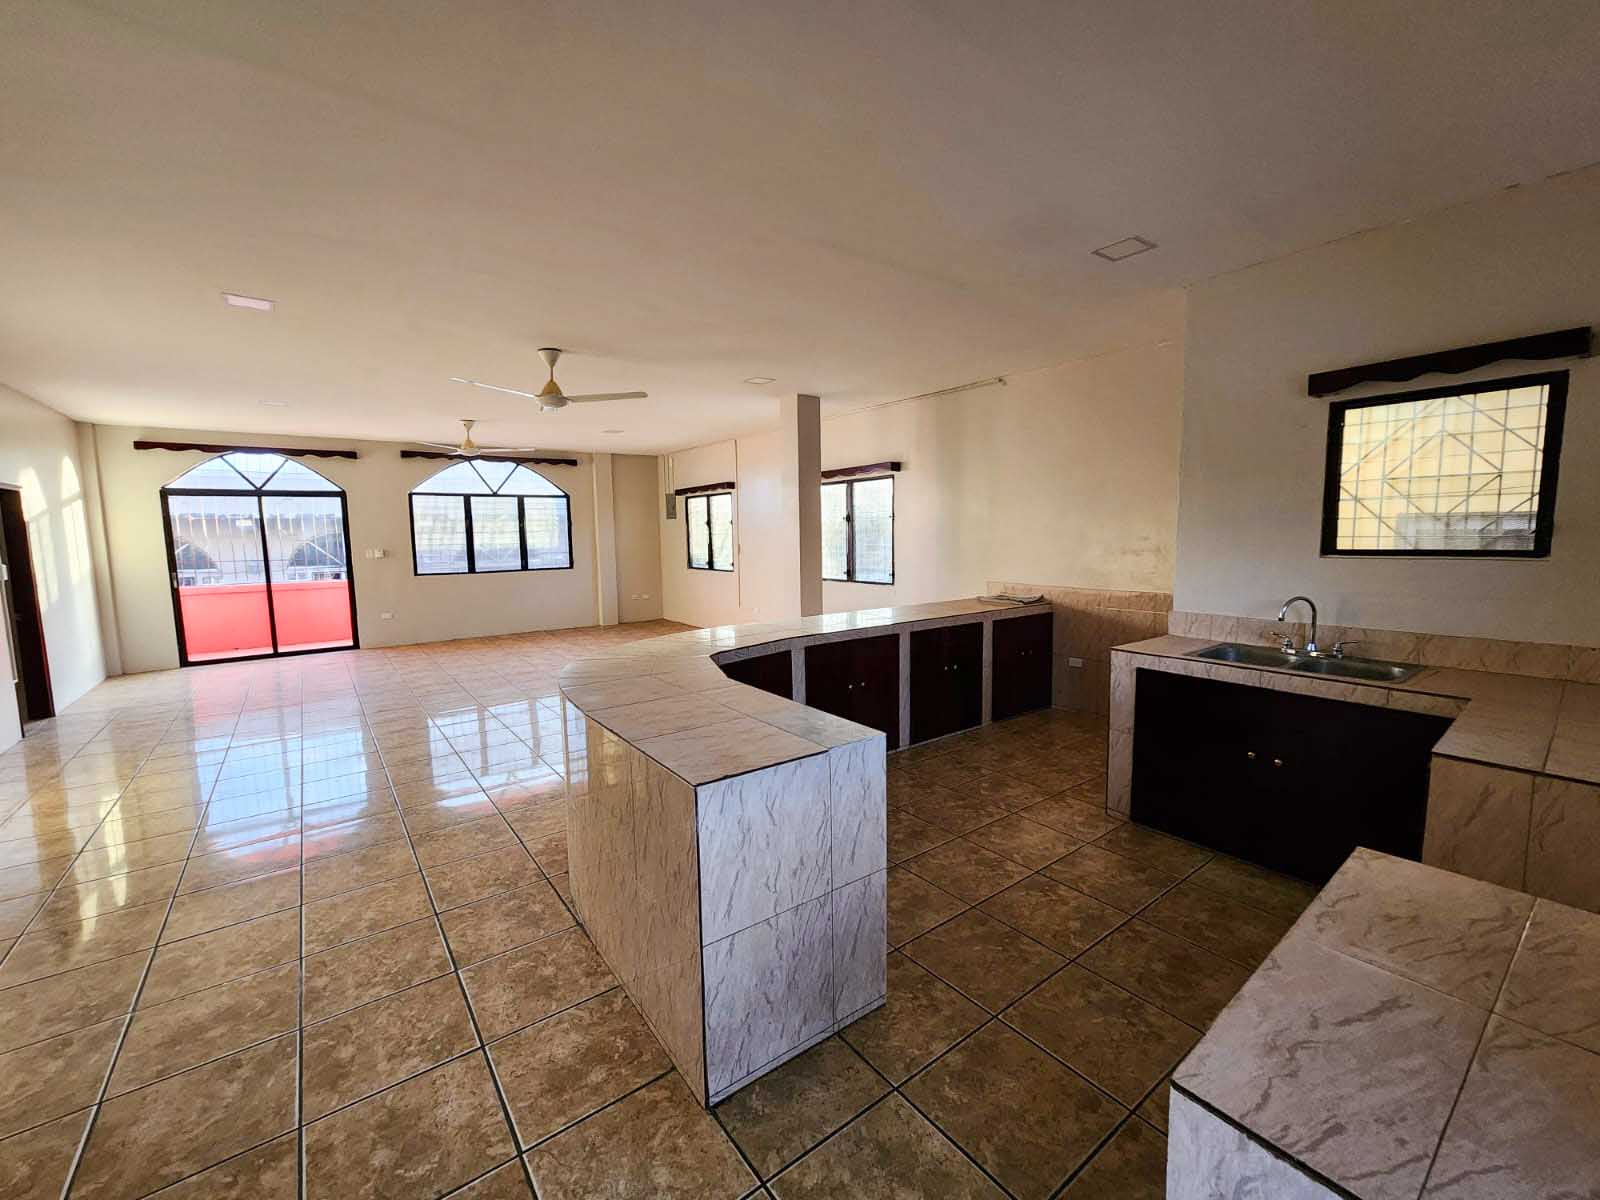 3 bedroom 2.5 bath Apartment for Rent in Downtown, Belize City